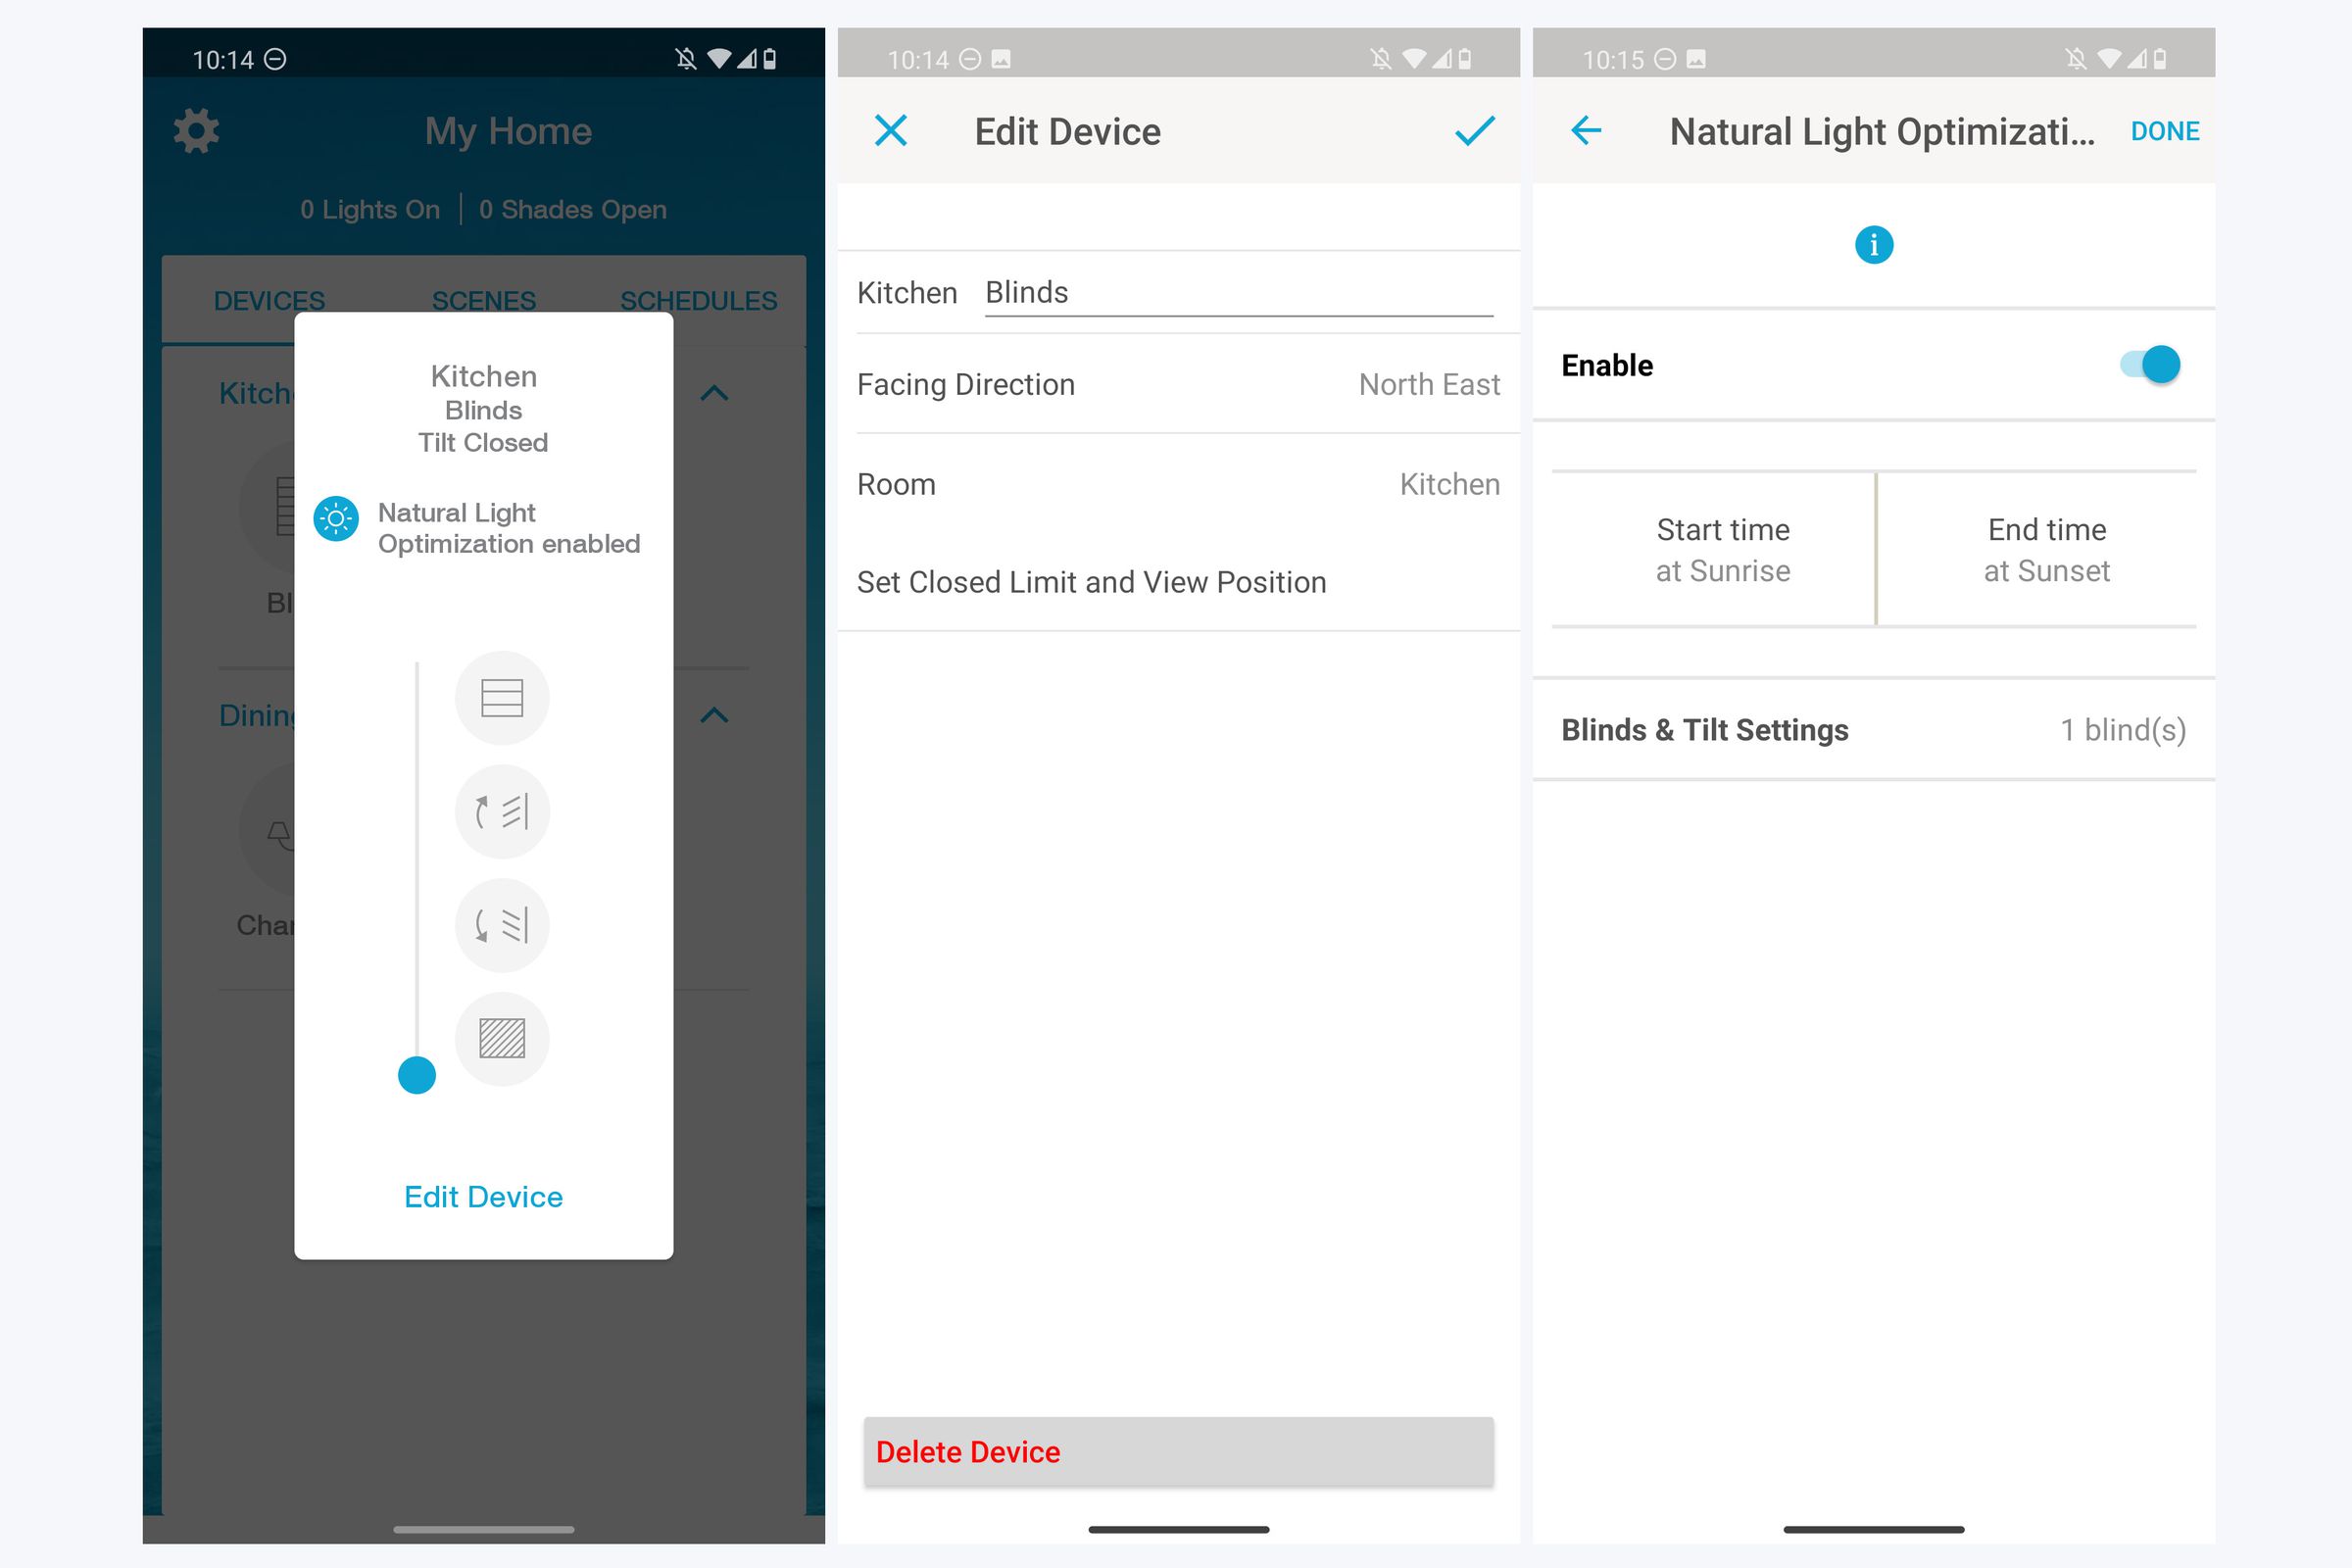 The Lutron mobile app lets you set up the blinds and remotely control them